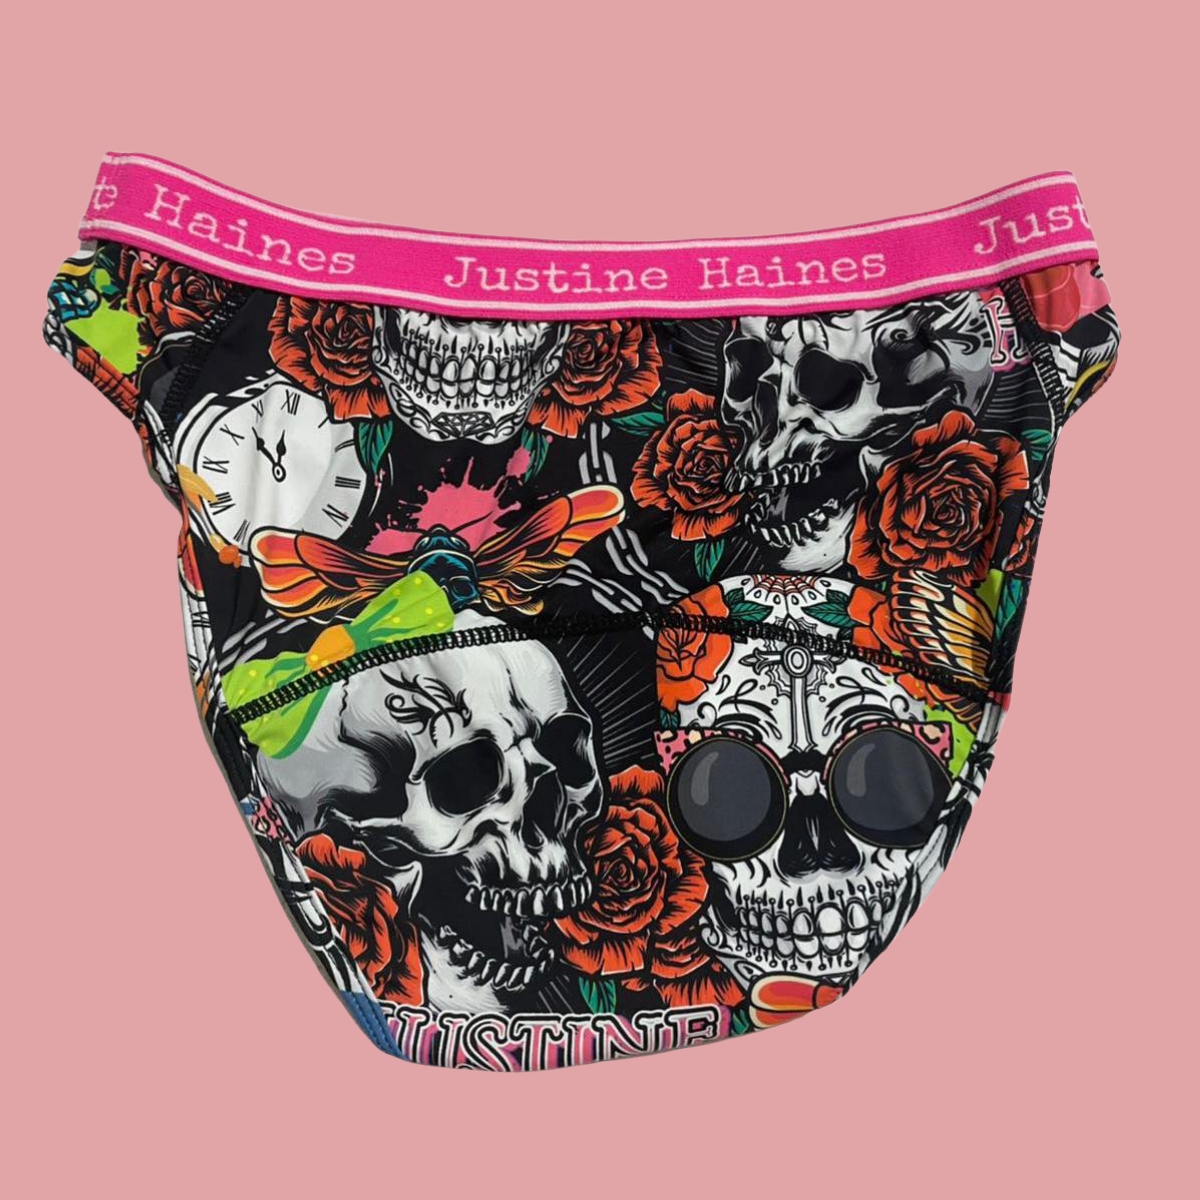 https://www.justinehaines.com/products/adorable-low-rise-fashion-print-period-panties-in-skulls-roses